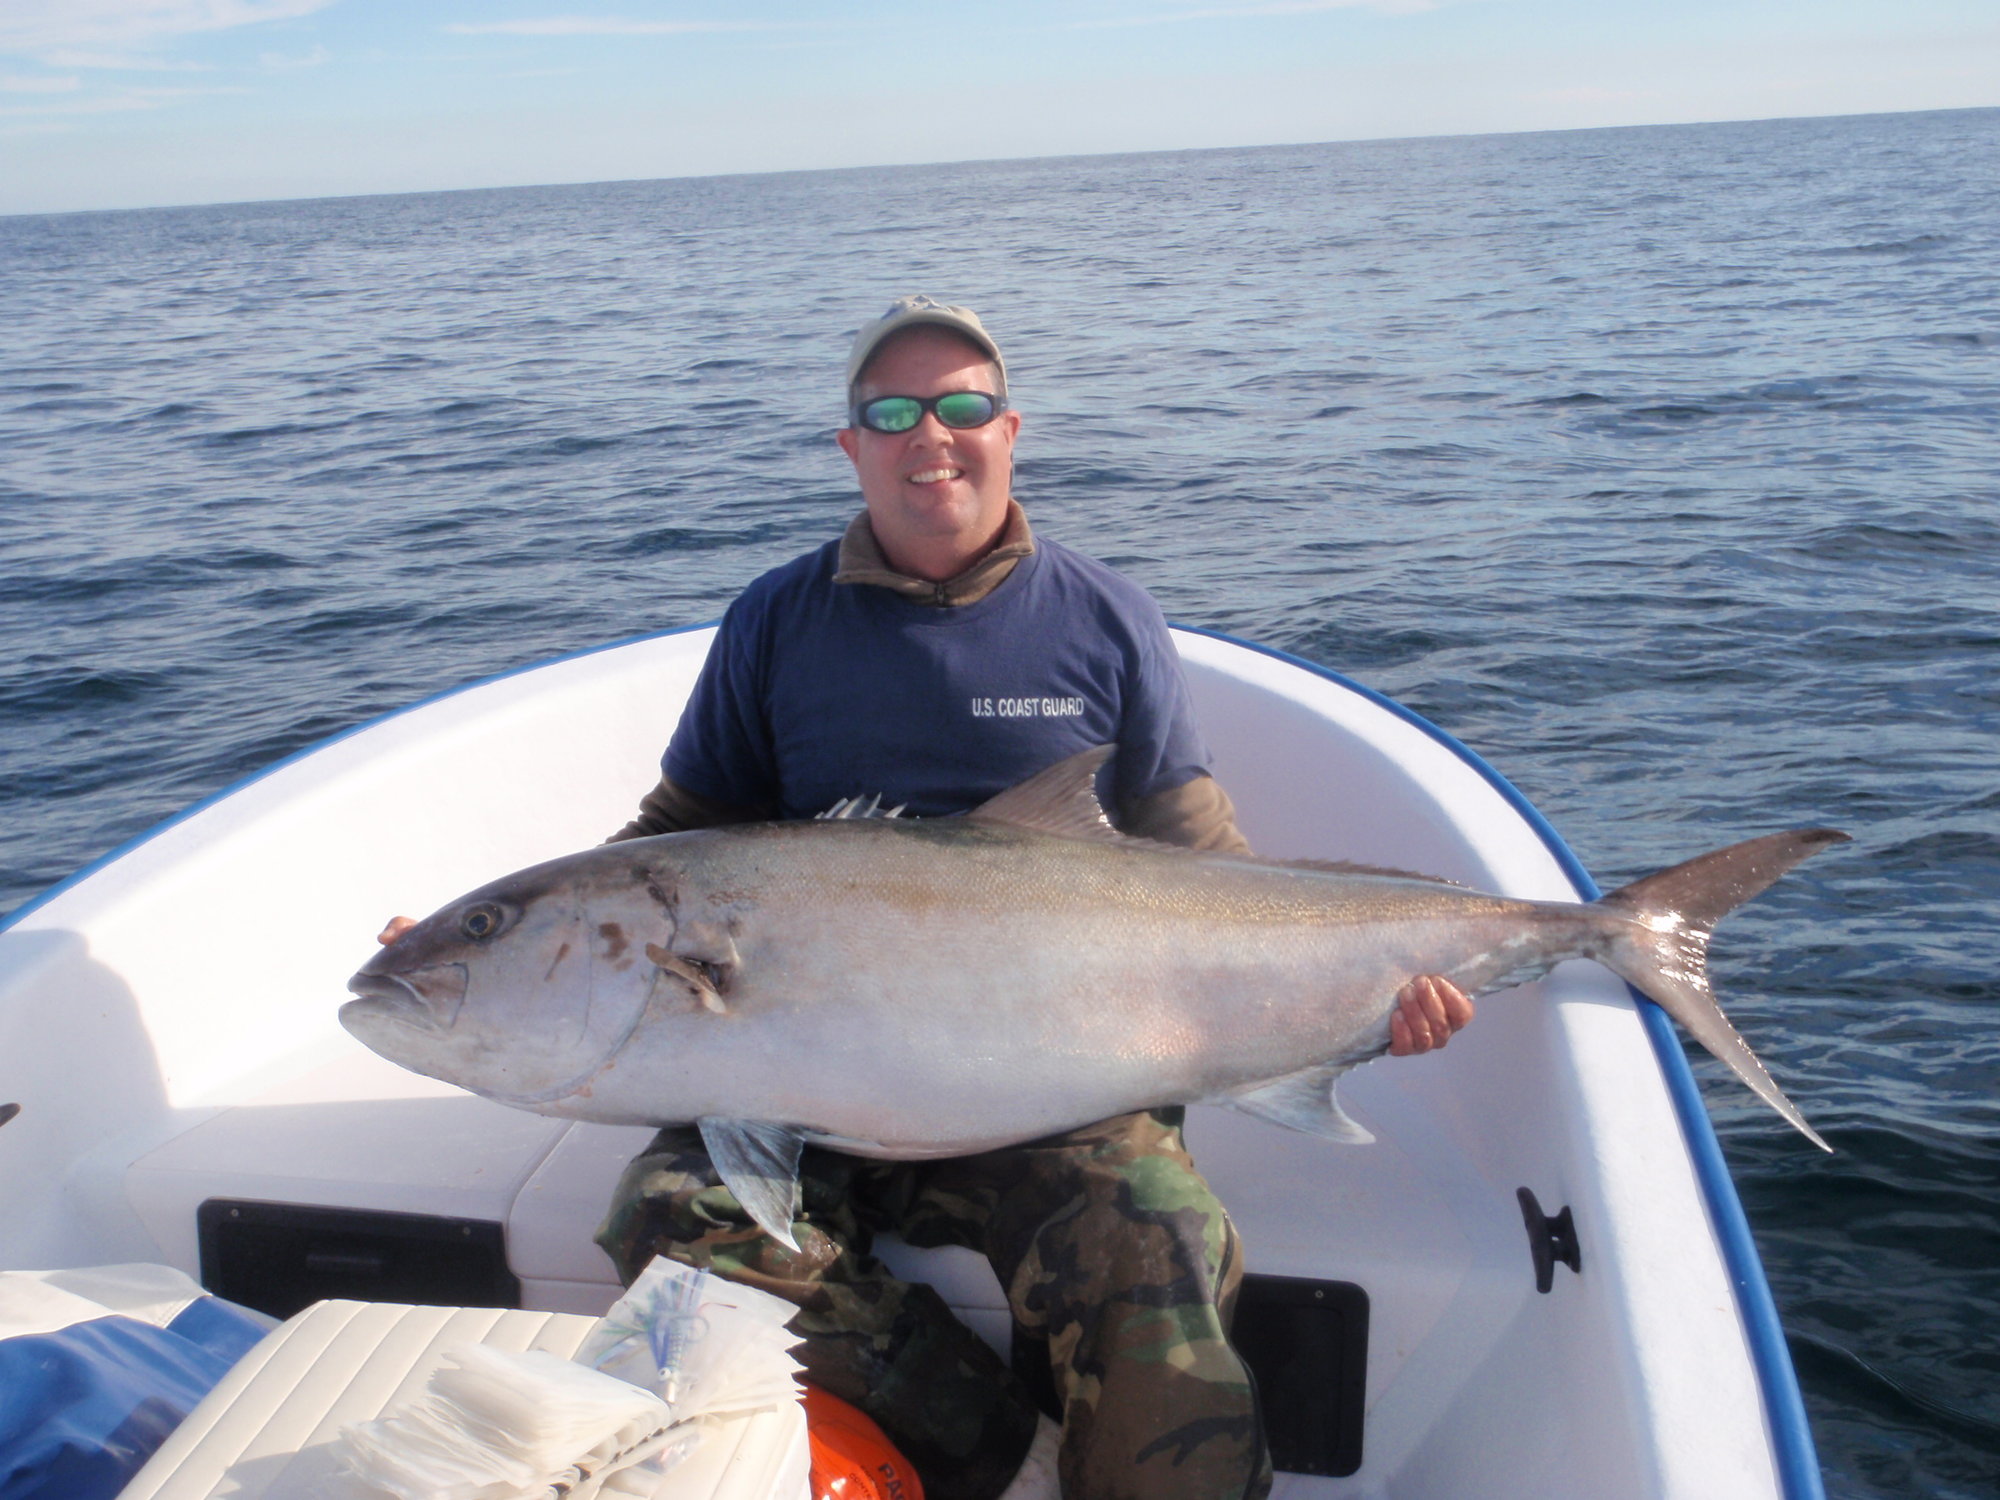 Amber Jack set ups and lures or bait. - The Hull Truth - Boating and Fishing  Forum